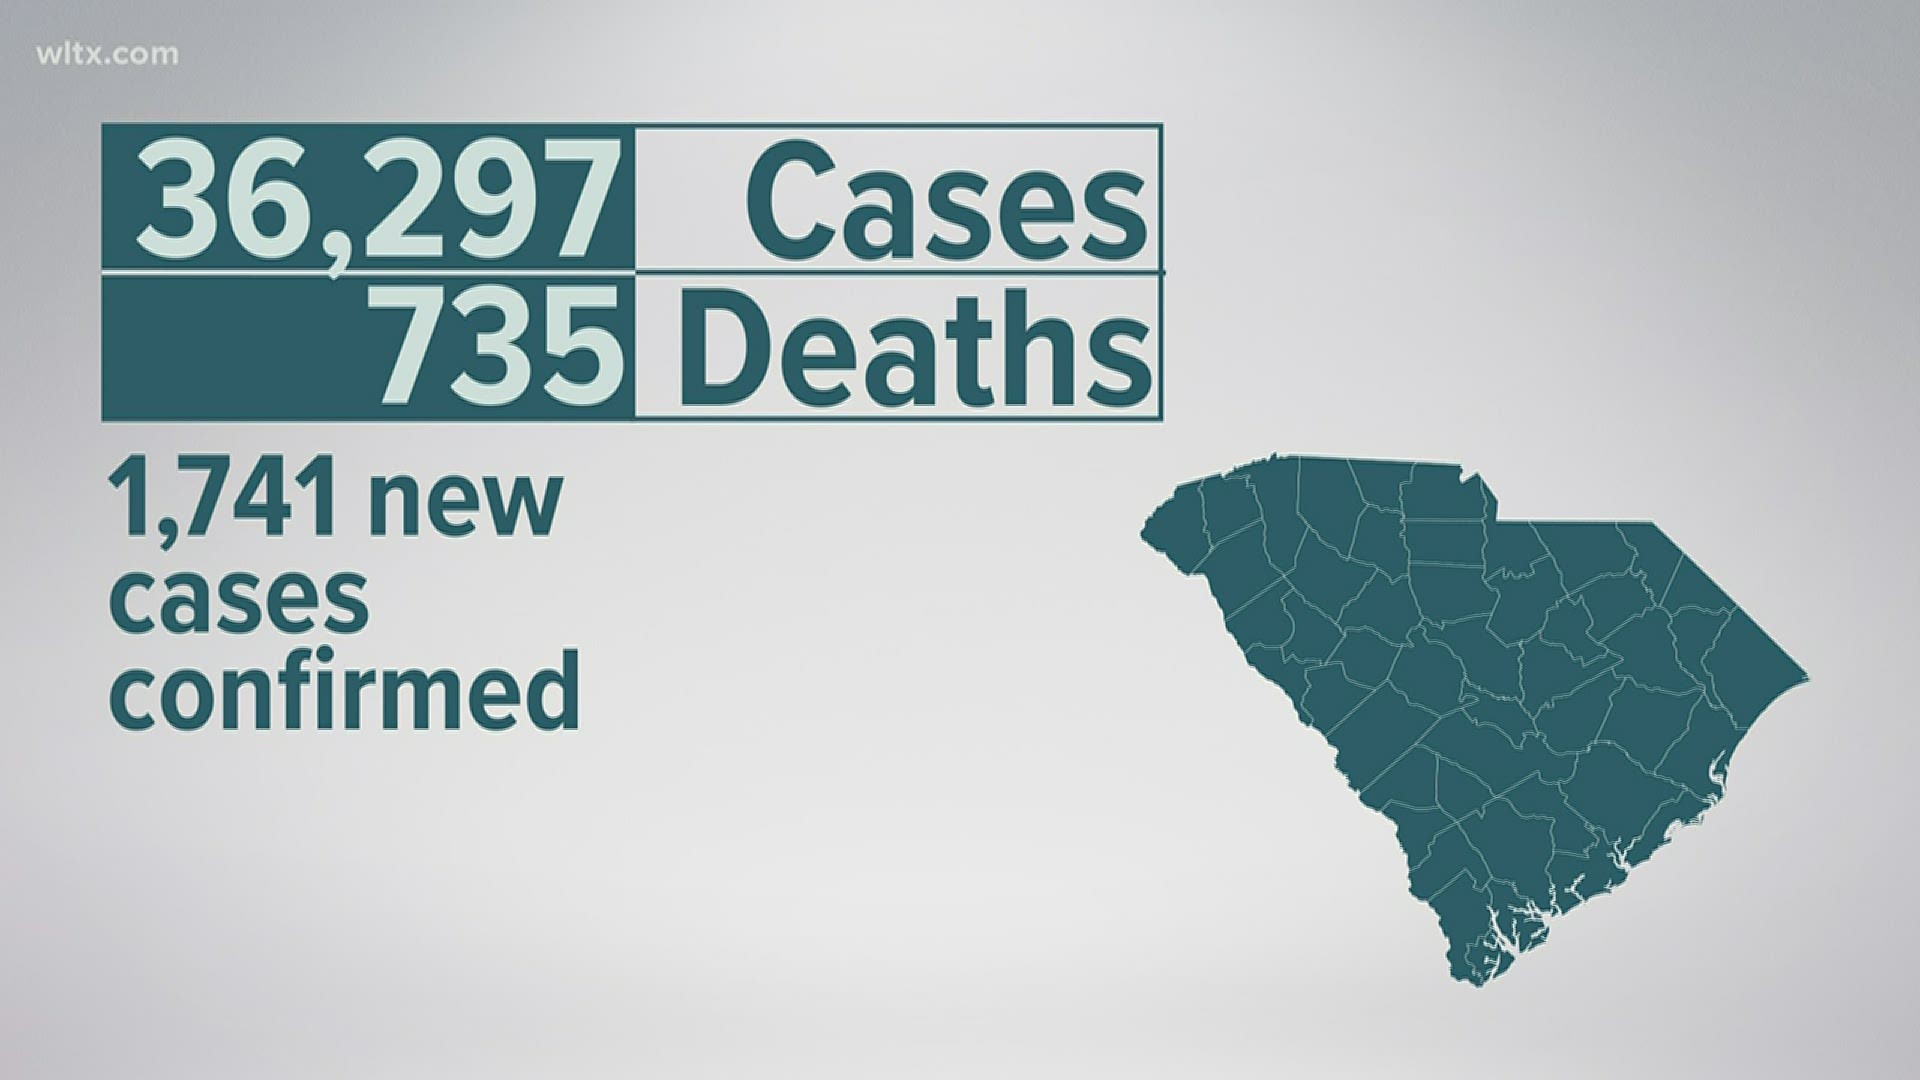 This brings the total number of confirmed cases to 36,297, probable cases to 102, confirmed deaths to 735, and 4 probable deaths